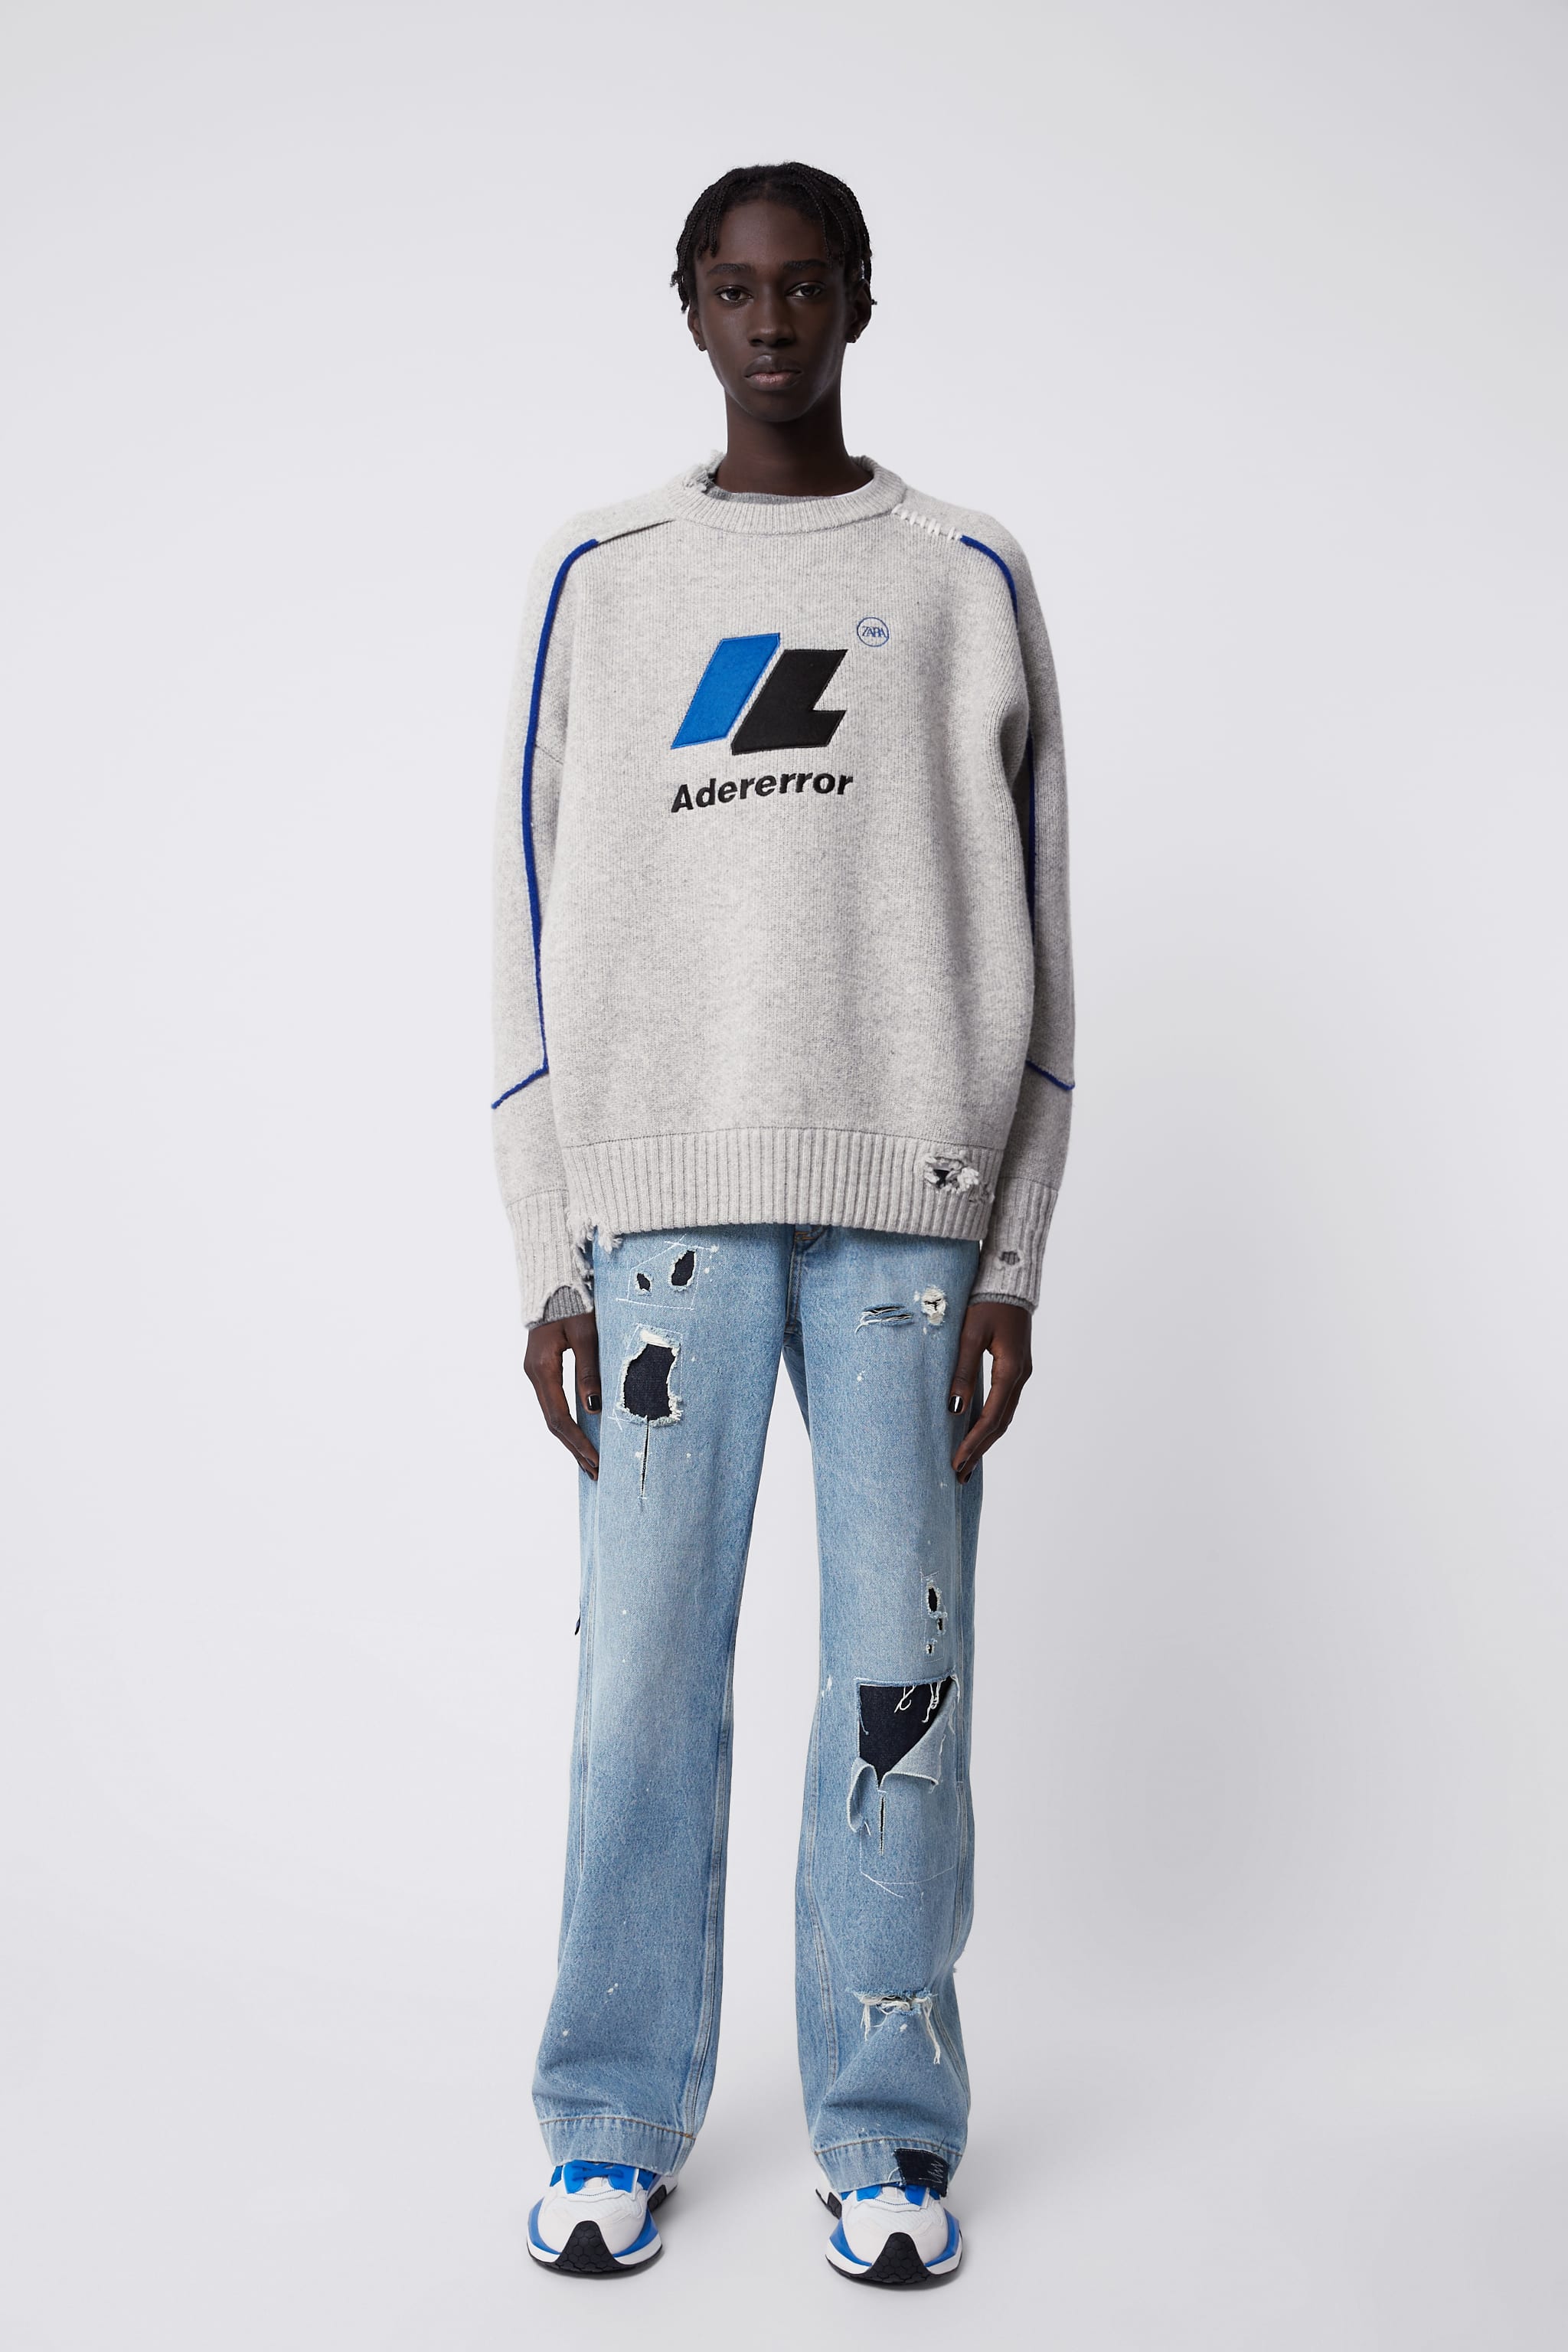 Ader Error and Zara Team Up for Expansive New AZ Collection